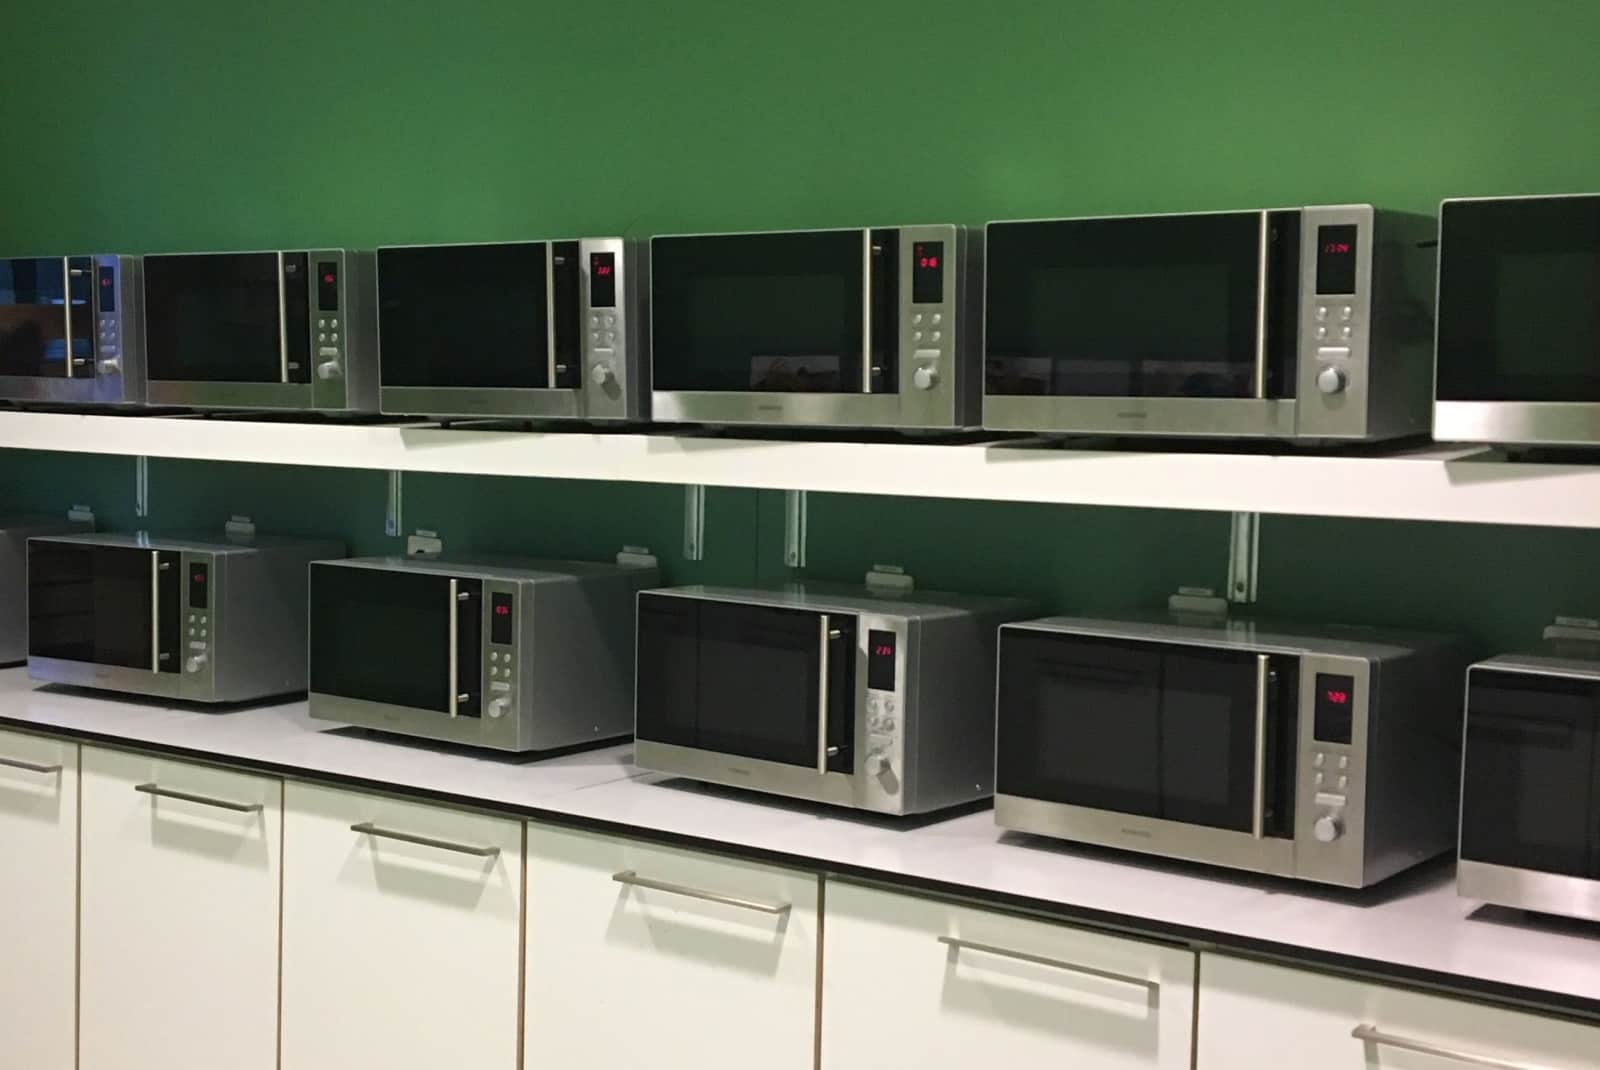 microwaves at the university